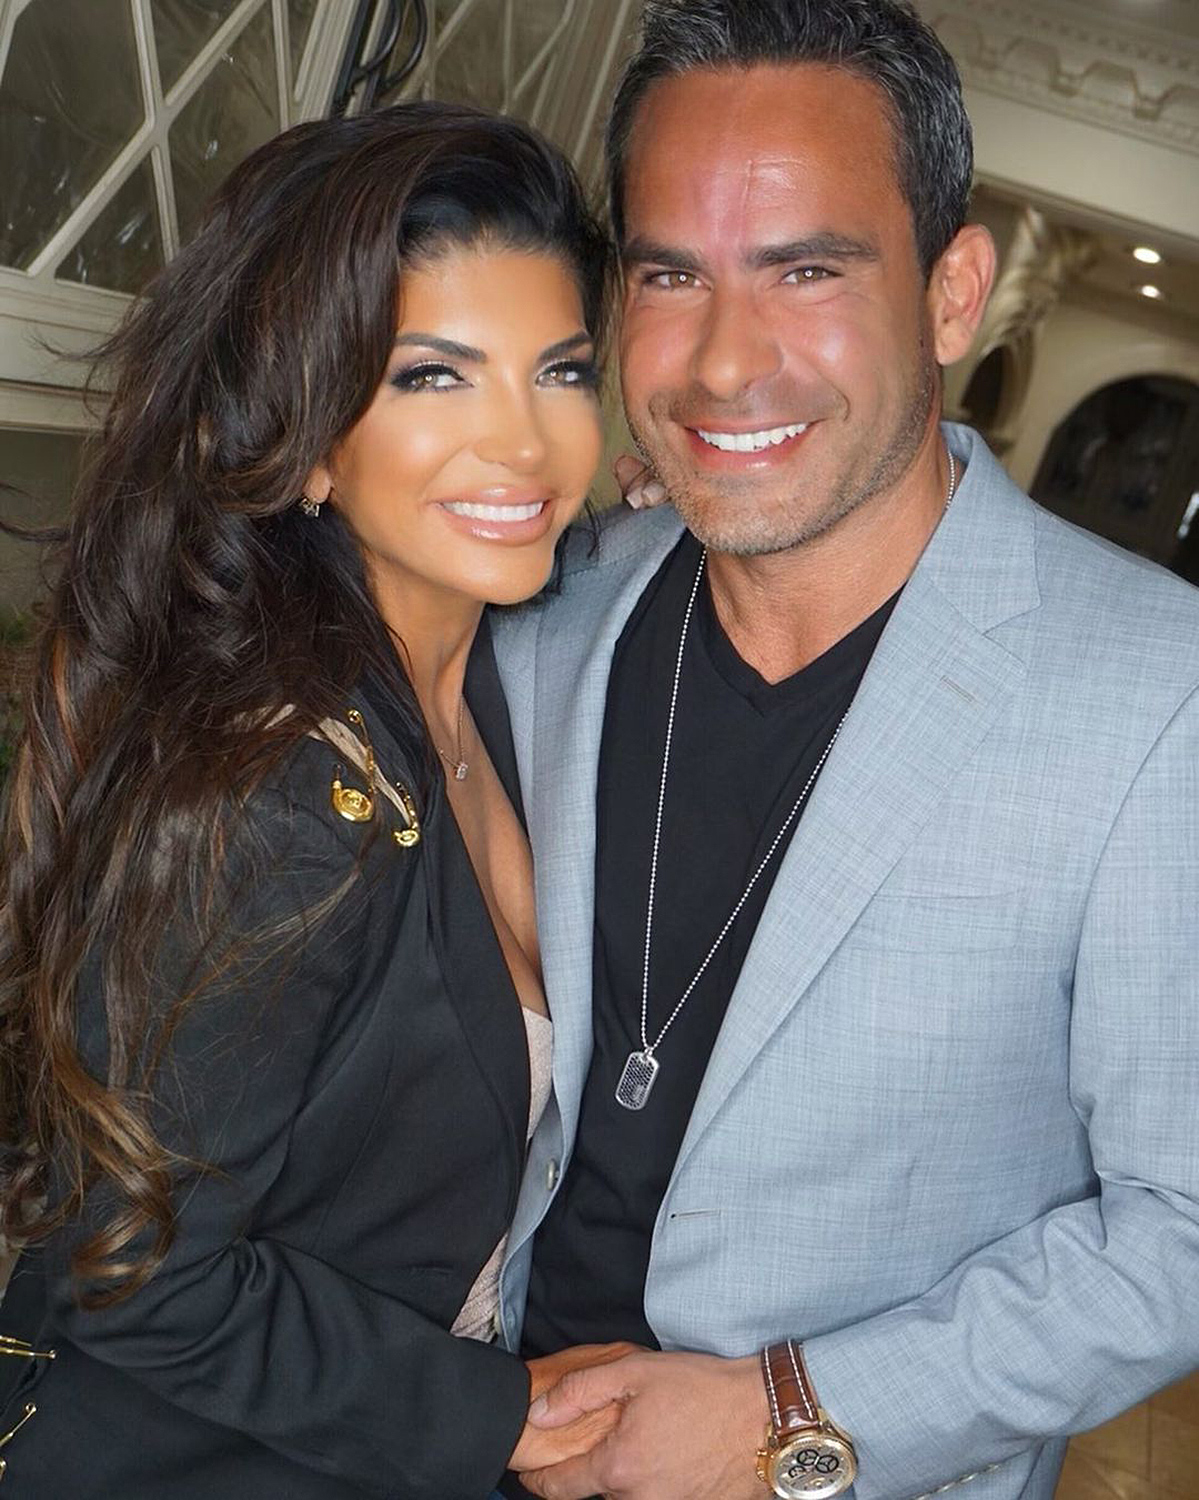 Teresa Giudice Real Housewives of New Jersey Star's Lawyer Reveals Heartwarming Memory of Her Prison Release!